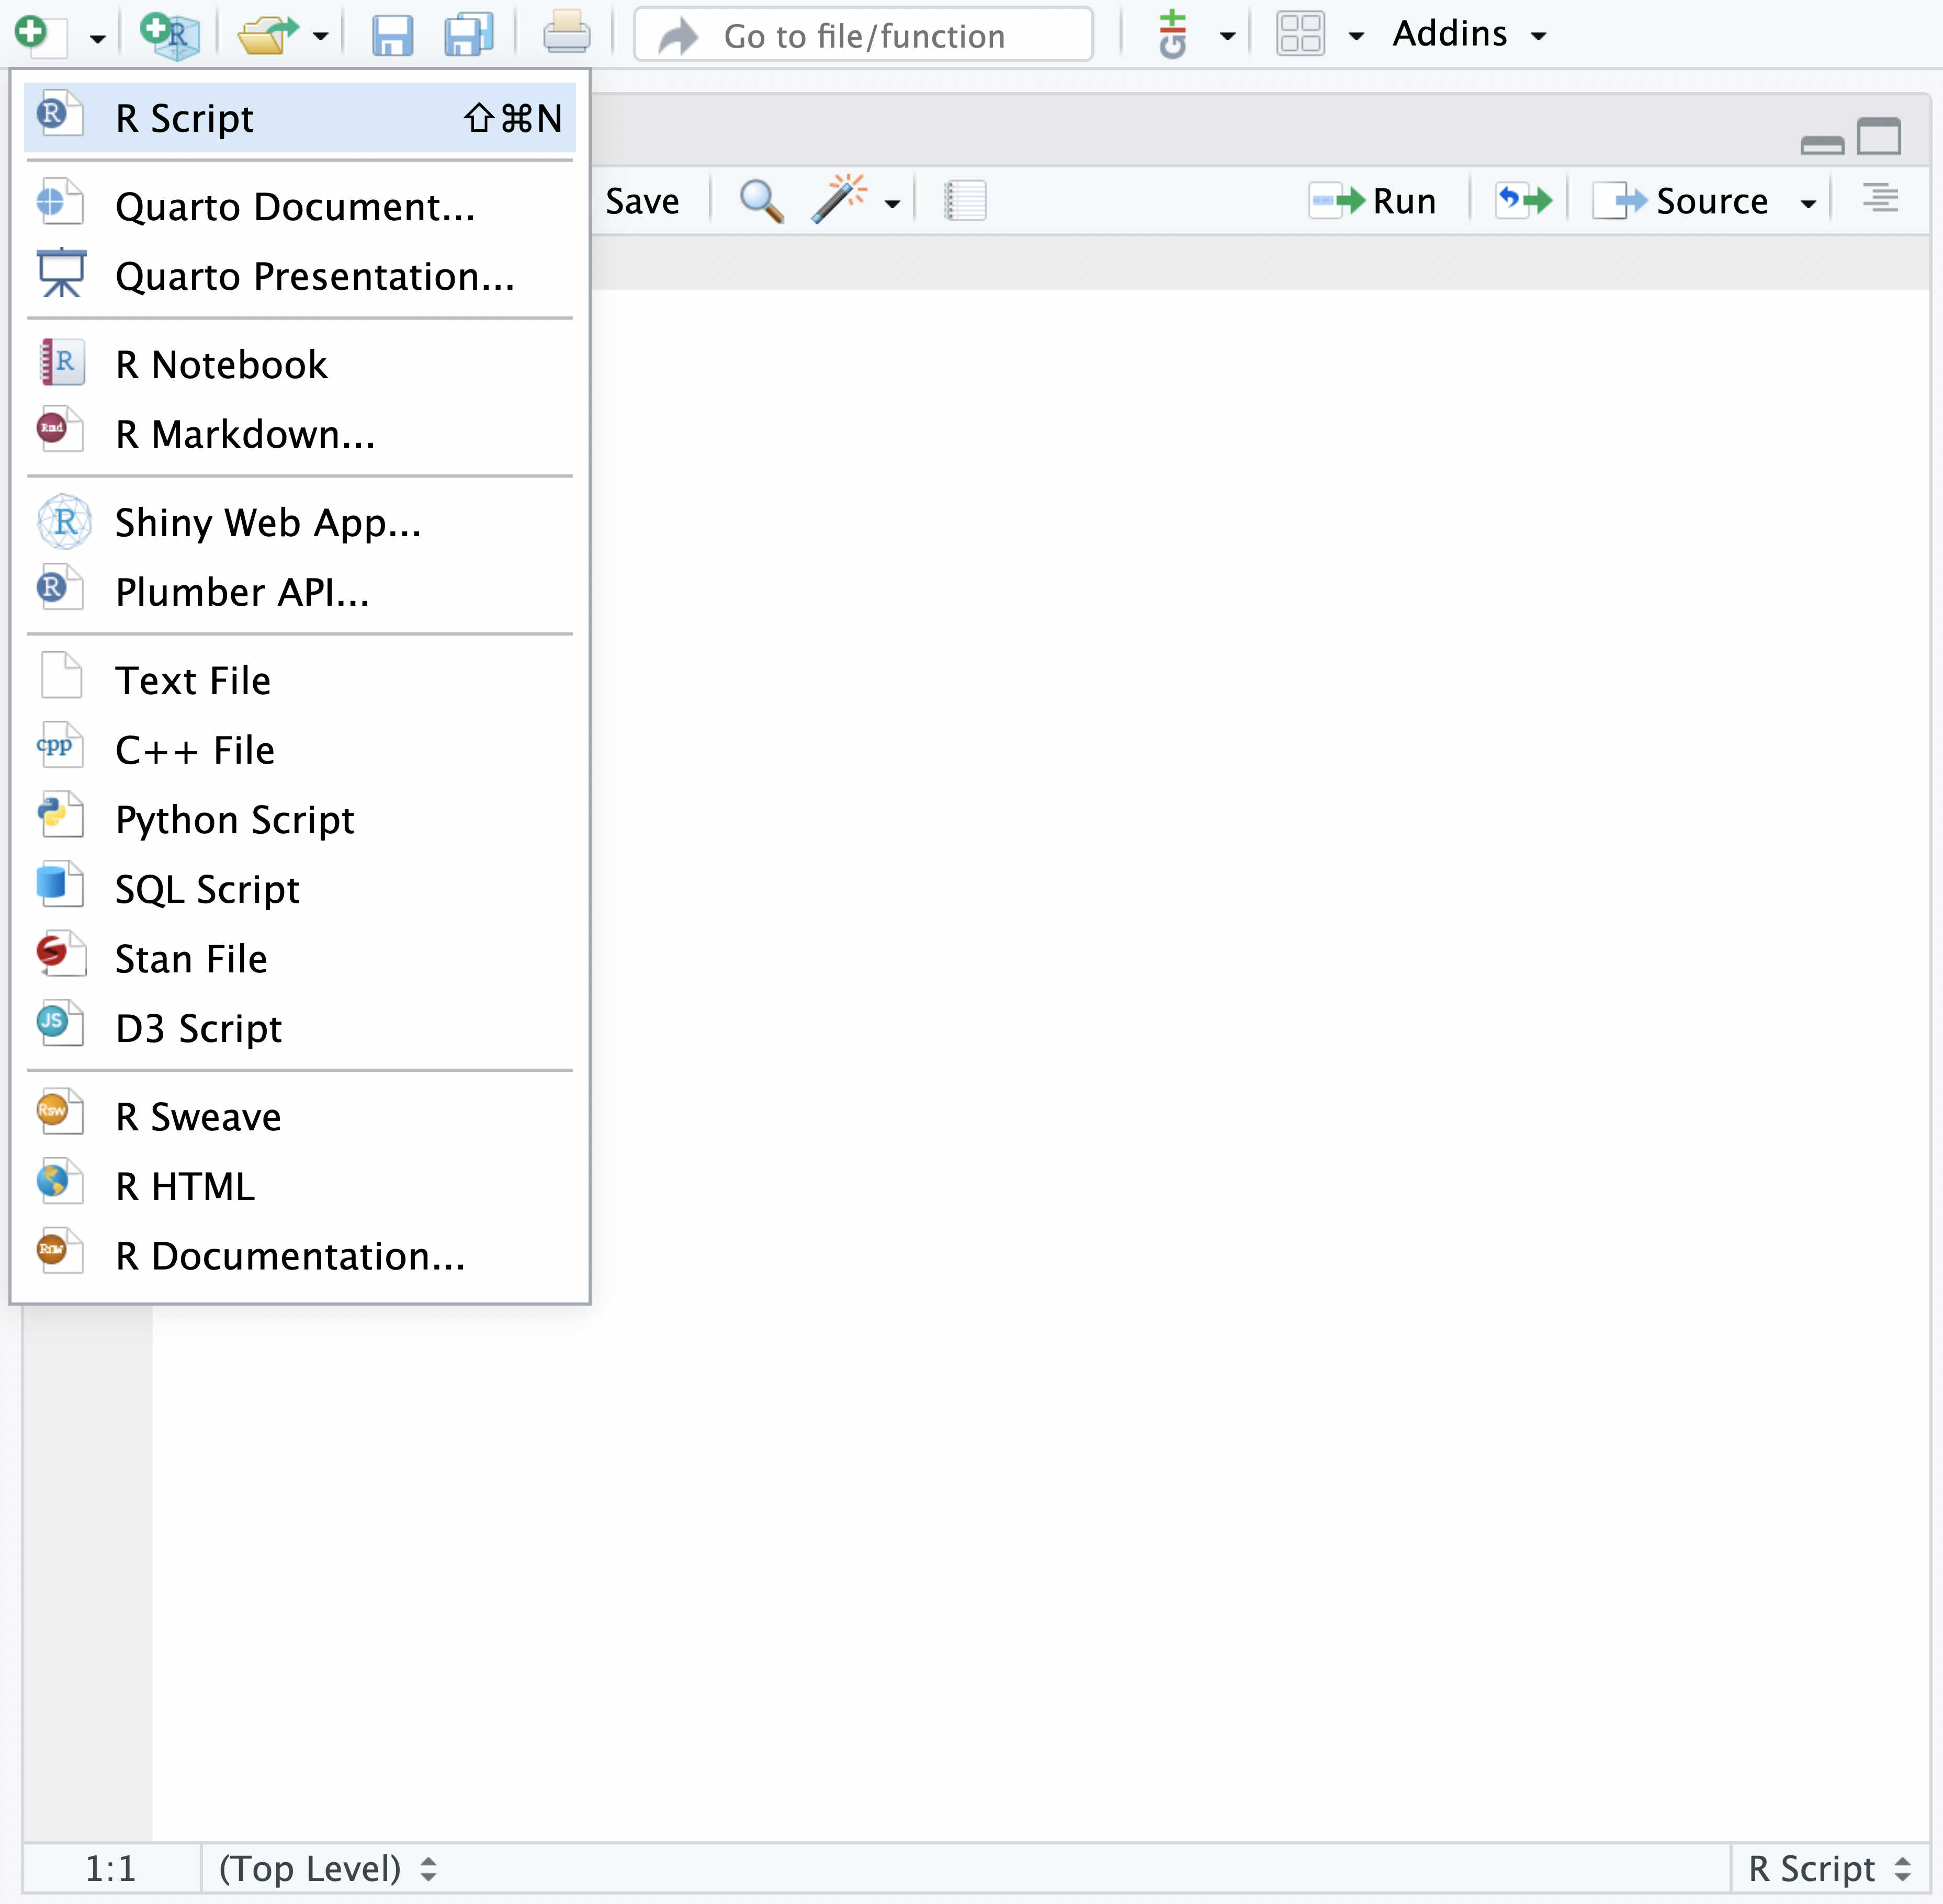 A screenshot of the New File drop-down in RStudio, which provides new R, Python, Quarto, Rmarkdown, Shiny or Plumber files.